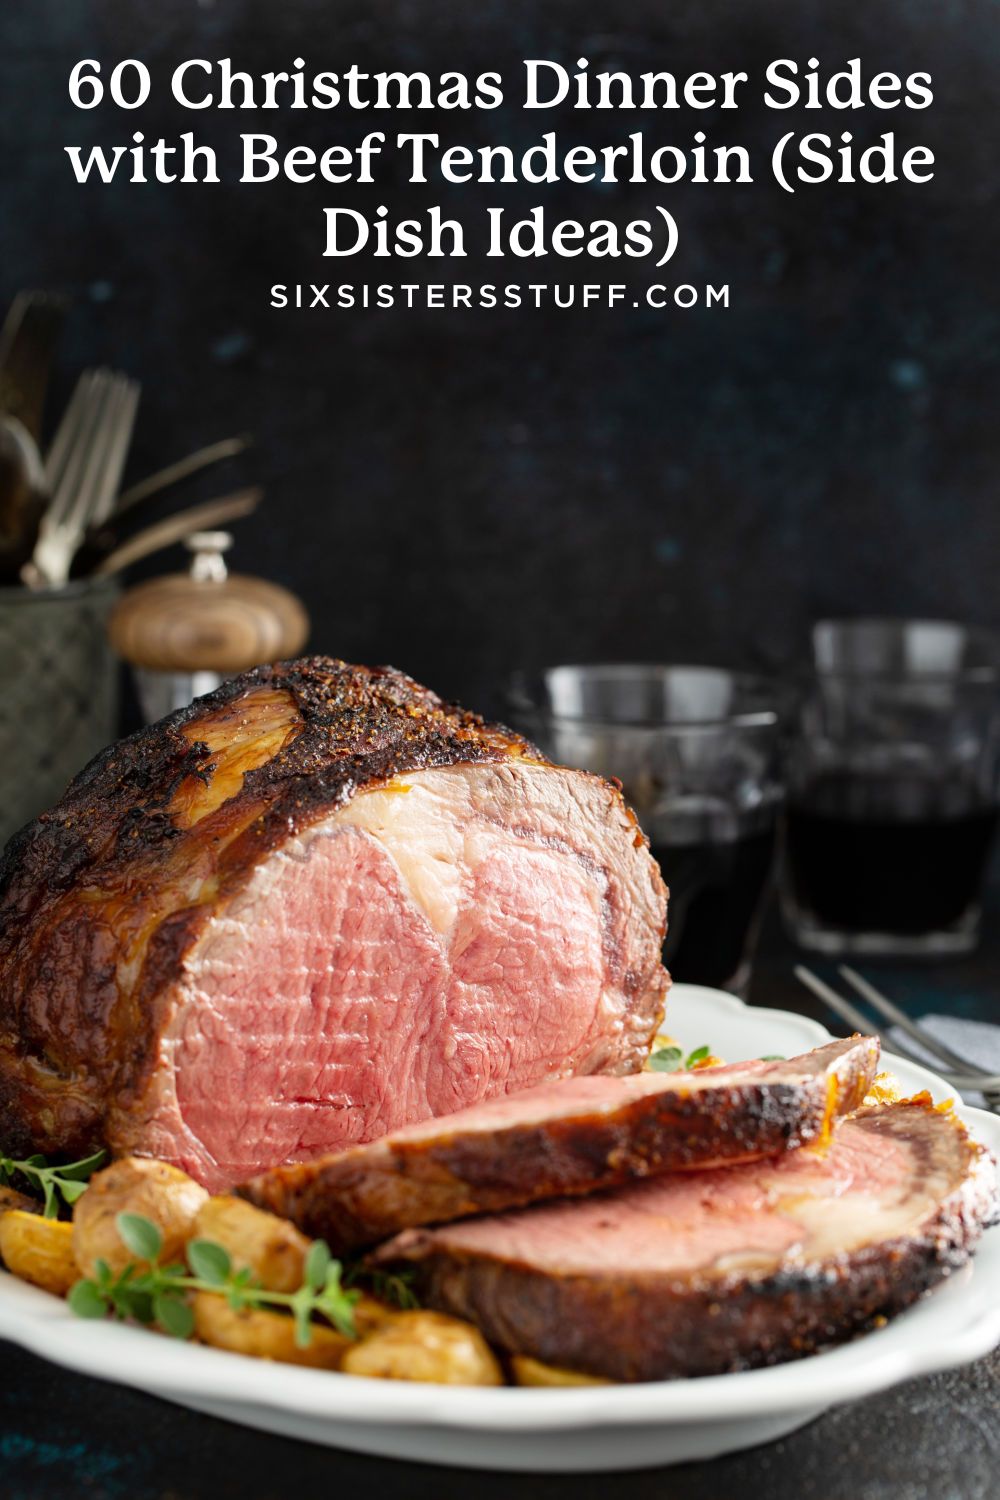 60 Christmas Dinner Sides with Beef Tenderloin (Side Dish Ideas)